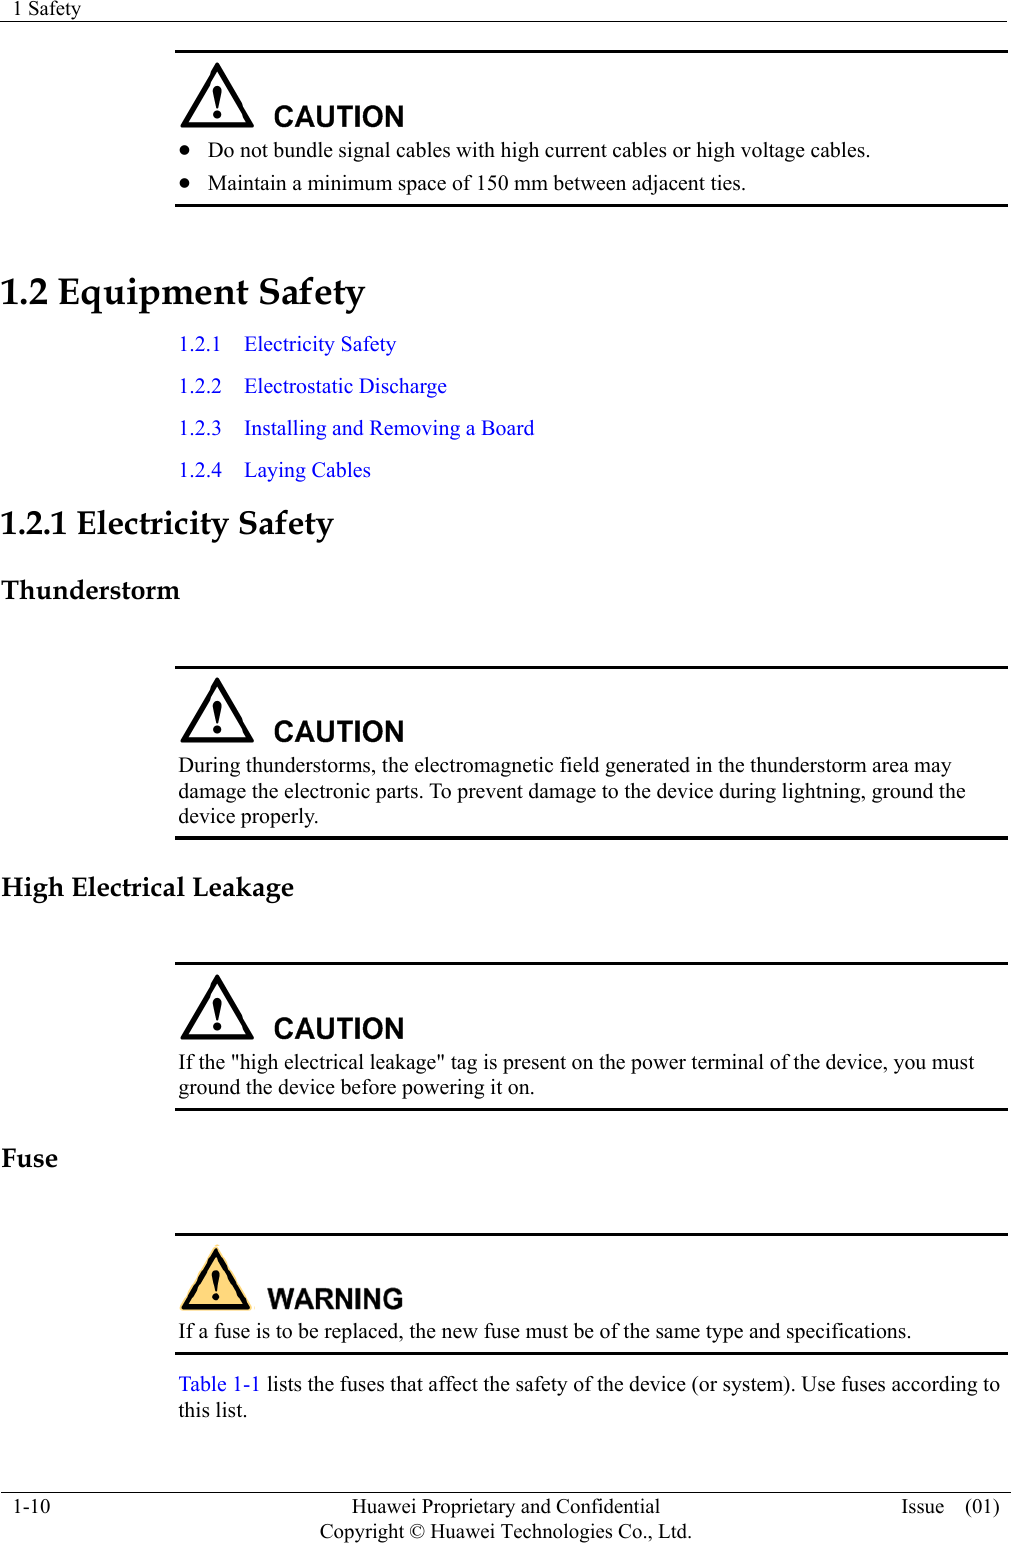 1 Safety    1-10  Huawei Proprietary and Confidential         Copyright © Huawei Technologies Co., Ltd. Issue  (01)    Do not bundle signal cables with high current cables or high voltage cables.  Maintain a minimum space of 150 mm between adjacent ties. 1.2 Equipment Safety 1.2.1  Electricity Safety 1.2.2  Electrostatic Discharge 1.2.3  Installing and Removing a Board 1.2.4  Laying Cables 1.2.1 Electricity Safety Thunderstorm   During thunderstorms, the electromagnetic field generated in the thunderstorm area may damage the electronic parts. To prevent damage to the device during lightning, ground the device properly. High Electrical Leakage   If the &quot;high electrical leakage&quot; tag is present on the power terminal of the device, you must ground the device before powering it on. Fuse   If a fuse is to be replaced, the new fuse must be of the same type and specifications. Table 1-1 lists the fuses that affect the safety of the device (or system). Use fuses according to this list. 